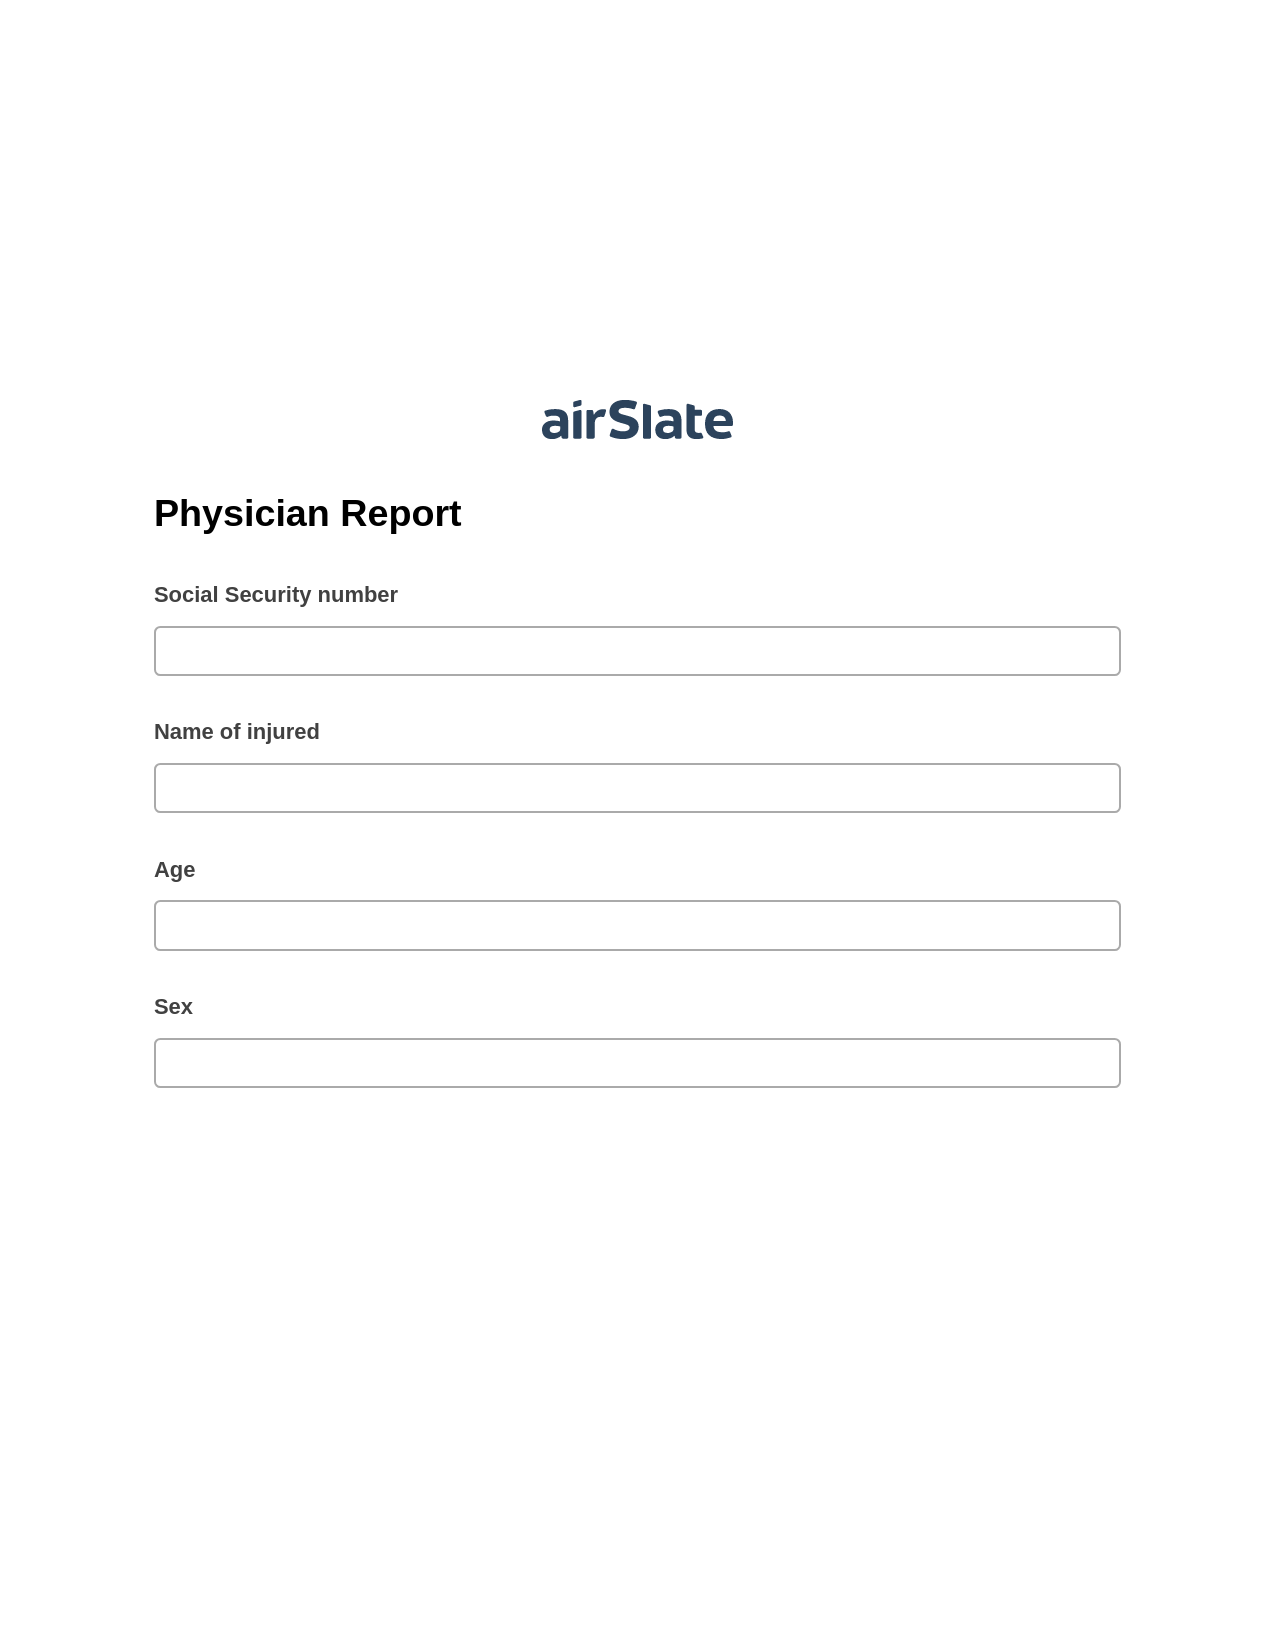 Physician Report Pre-fill from Salesforce Records Bot, Update NetSuite Record Bot, Export to Salesforce Record Bot